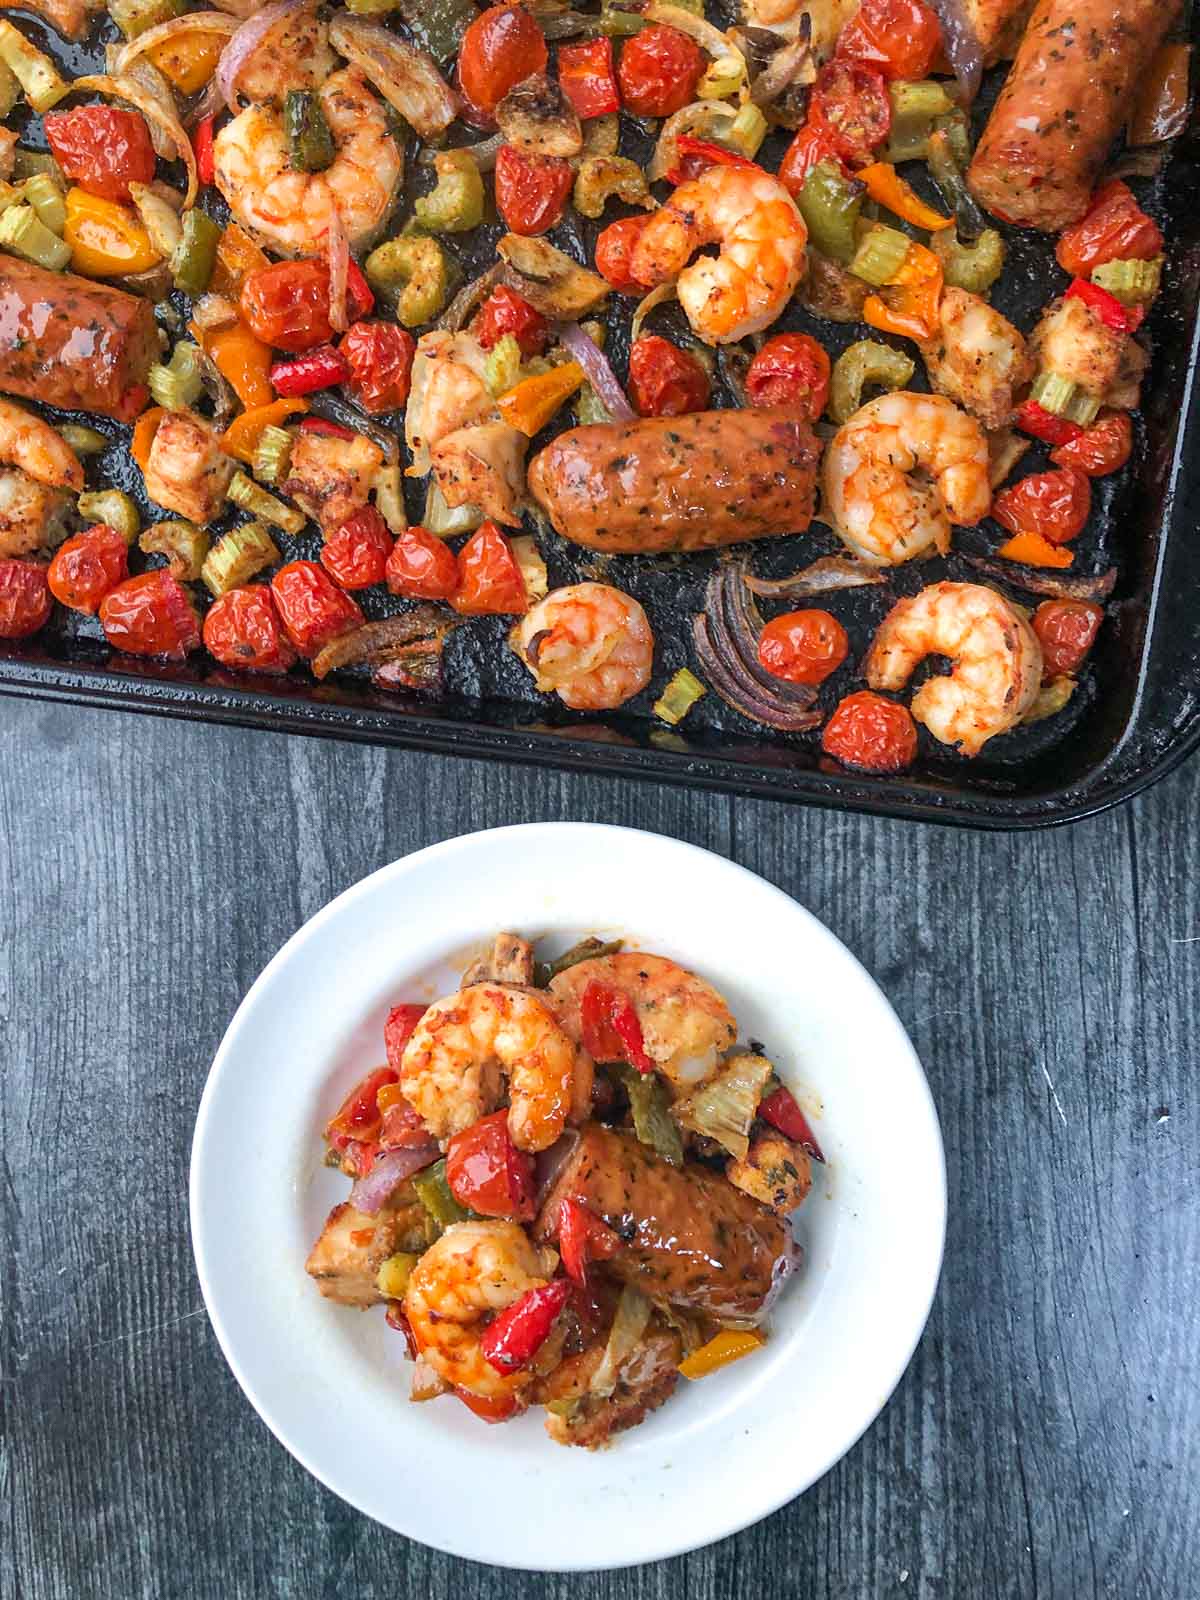 aerial view of a baking sheet and white plate with cajun shrimp, sausage, chicken and veggies